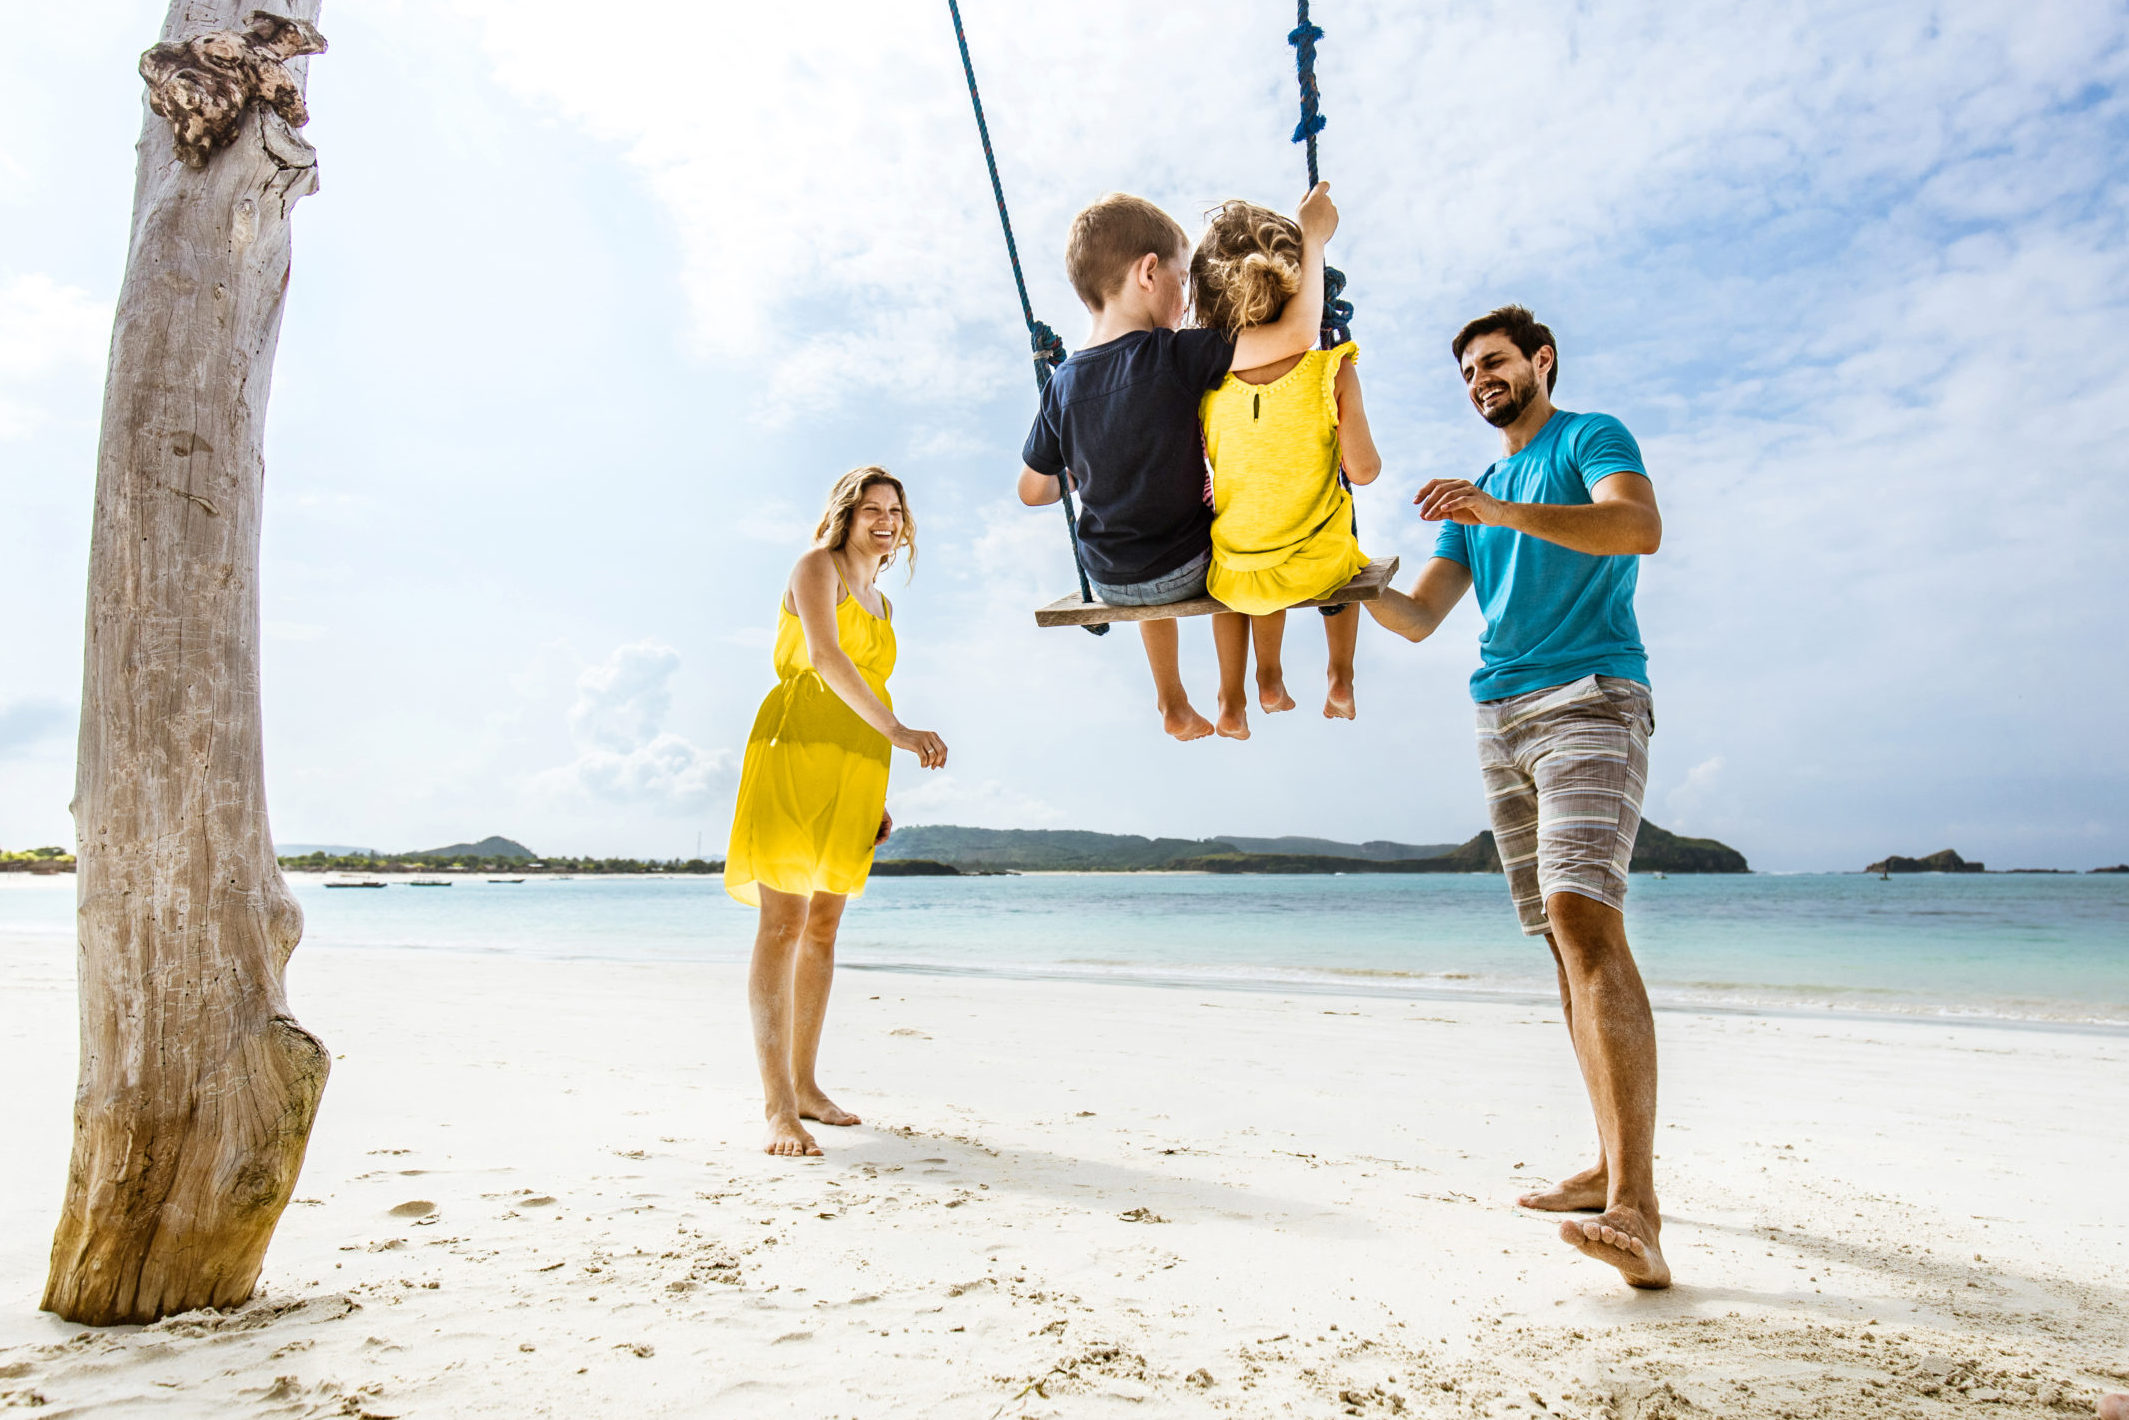 young parents swing their small kids during a summer day on the beach